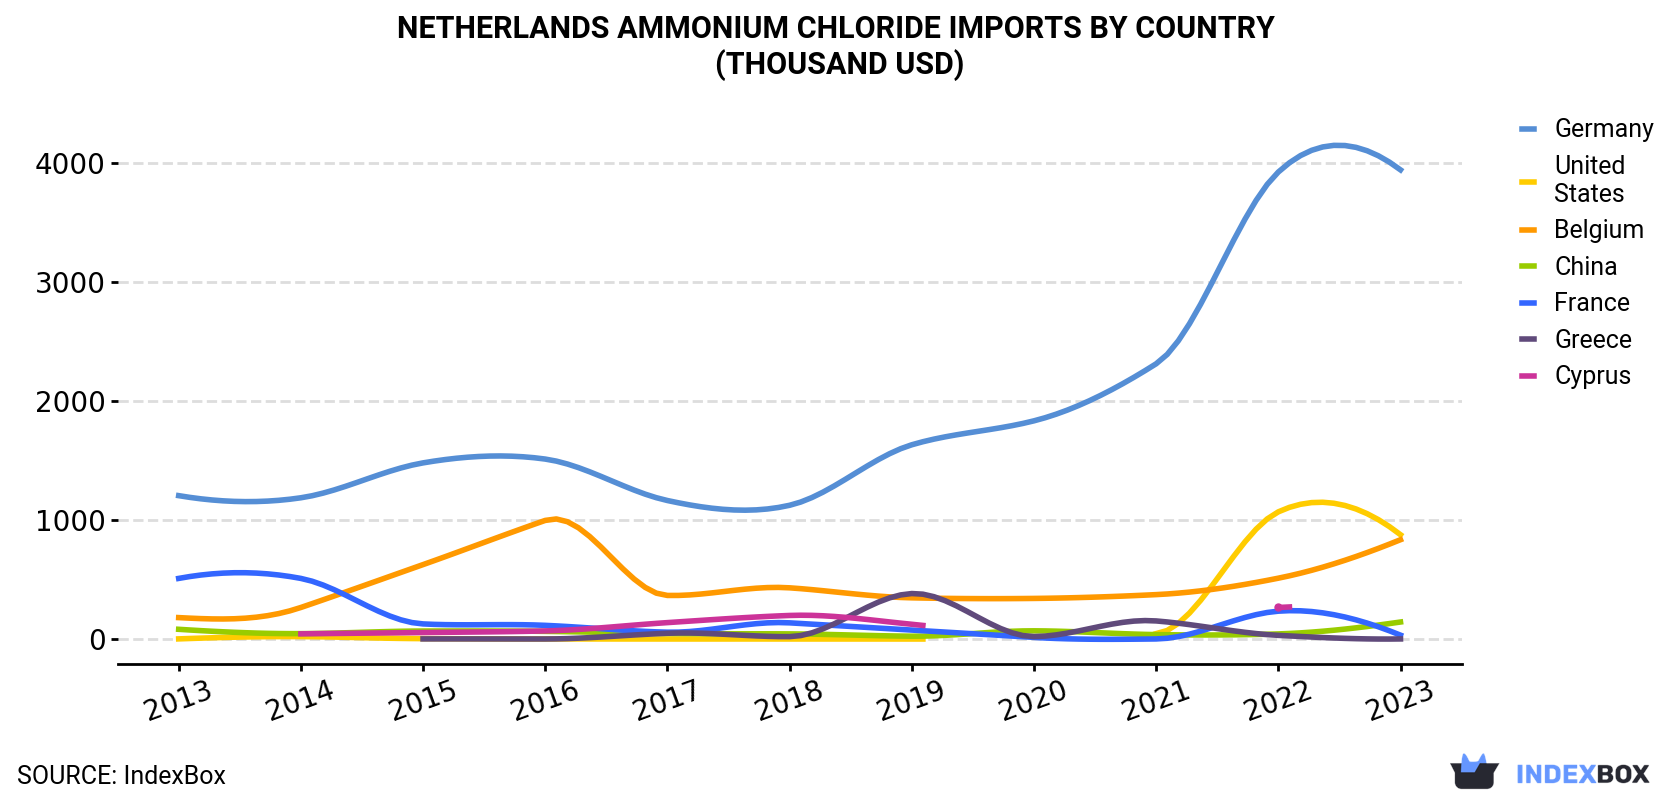 Netherlands Ammonium Chloride Imports By Country (Thousand USD)